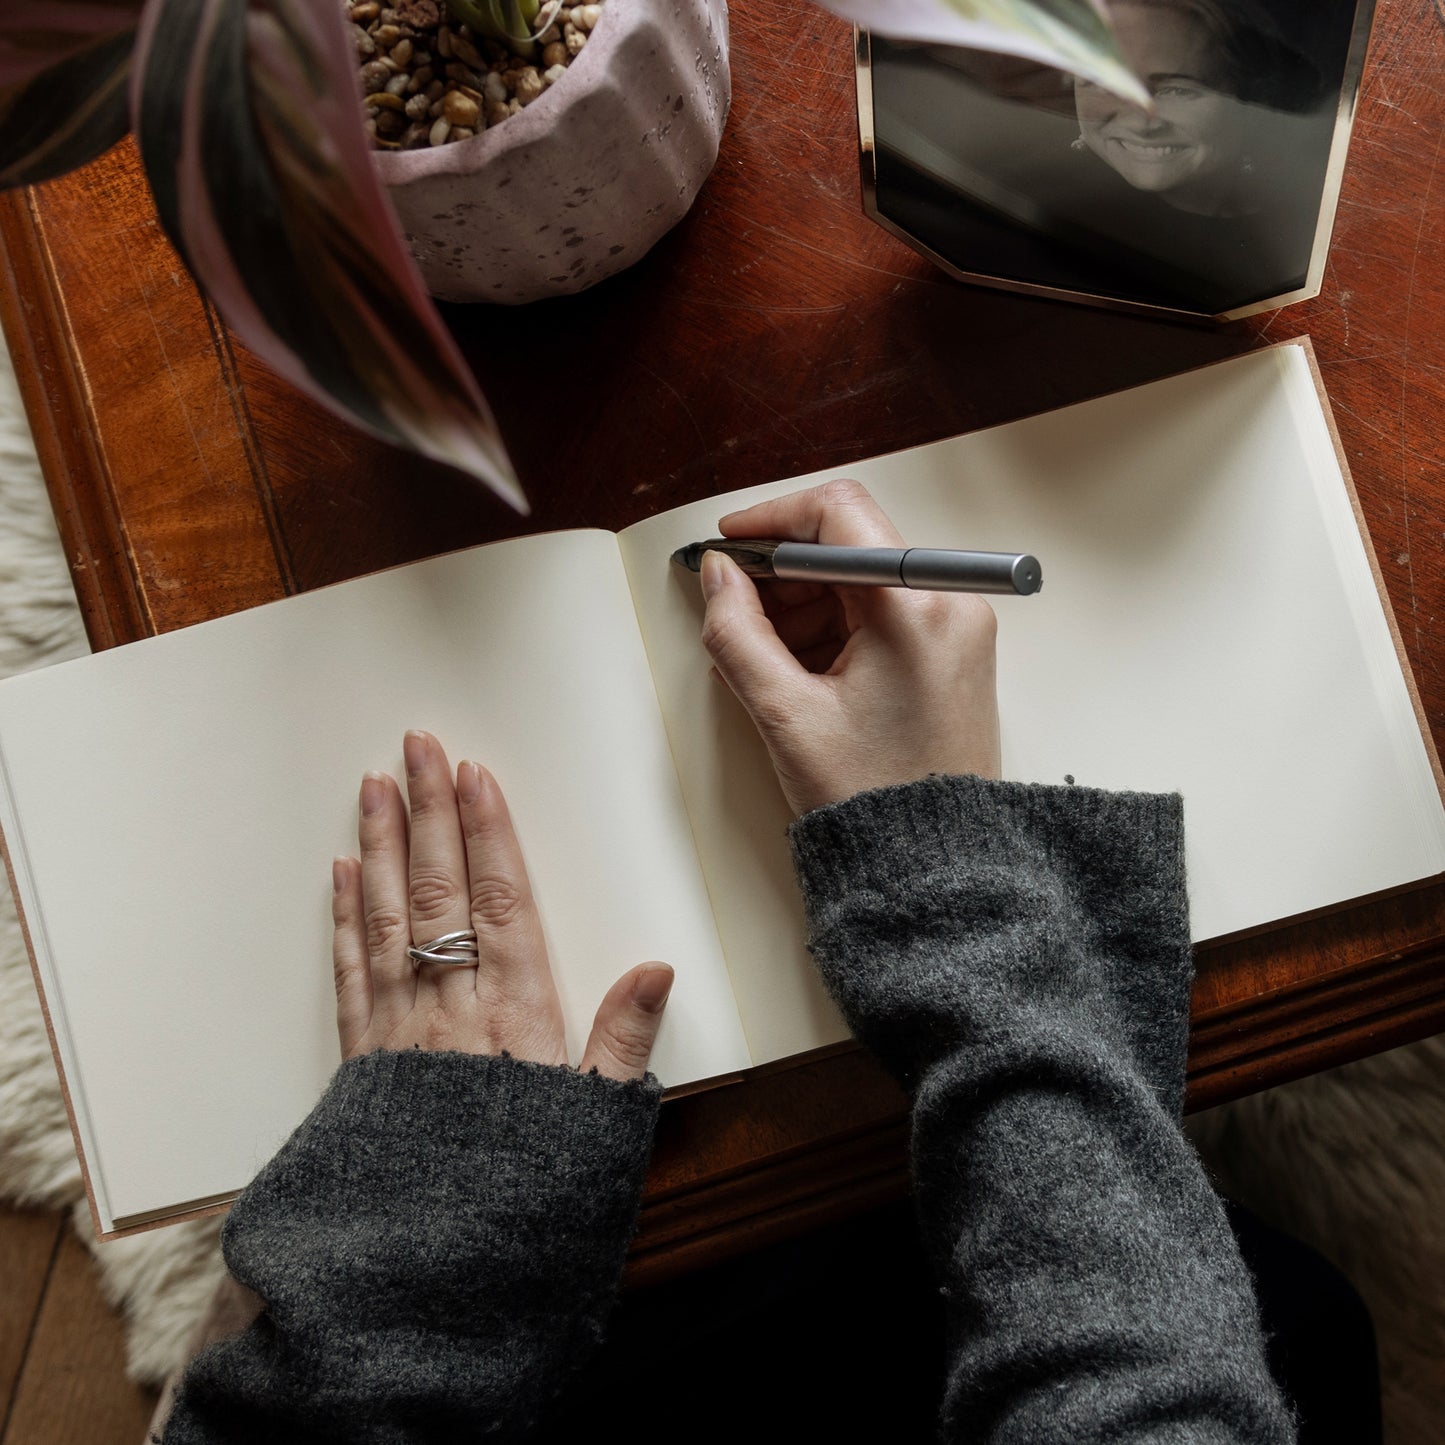 a large condolence book lies open on a wooden table and a woman in a grey jumper is poised with a pen and about to write a message in it